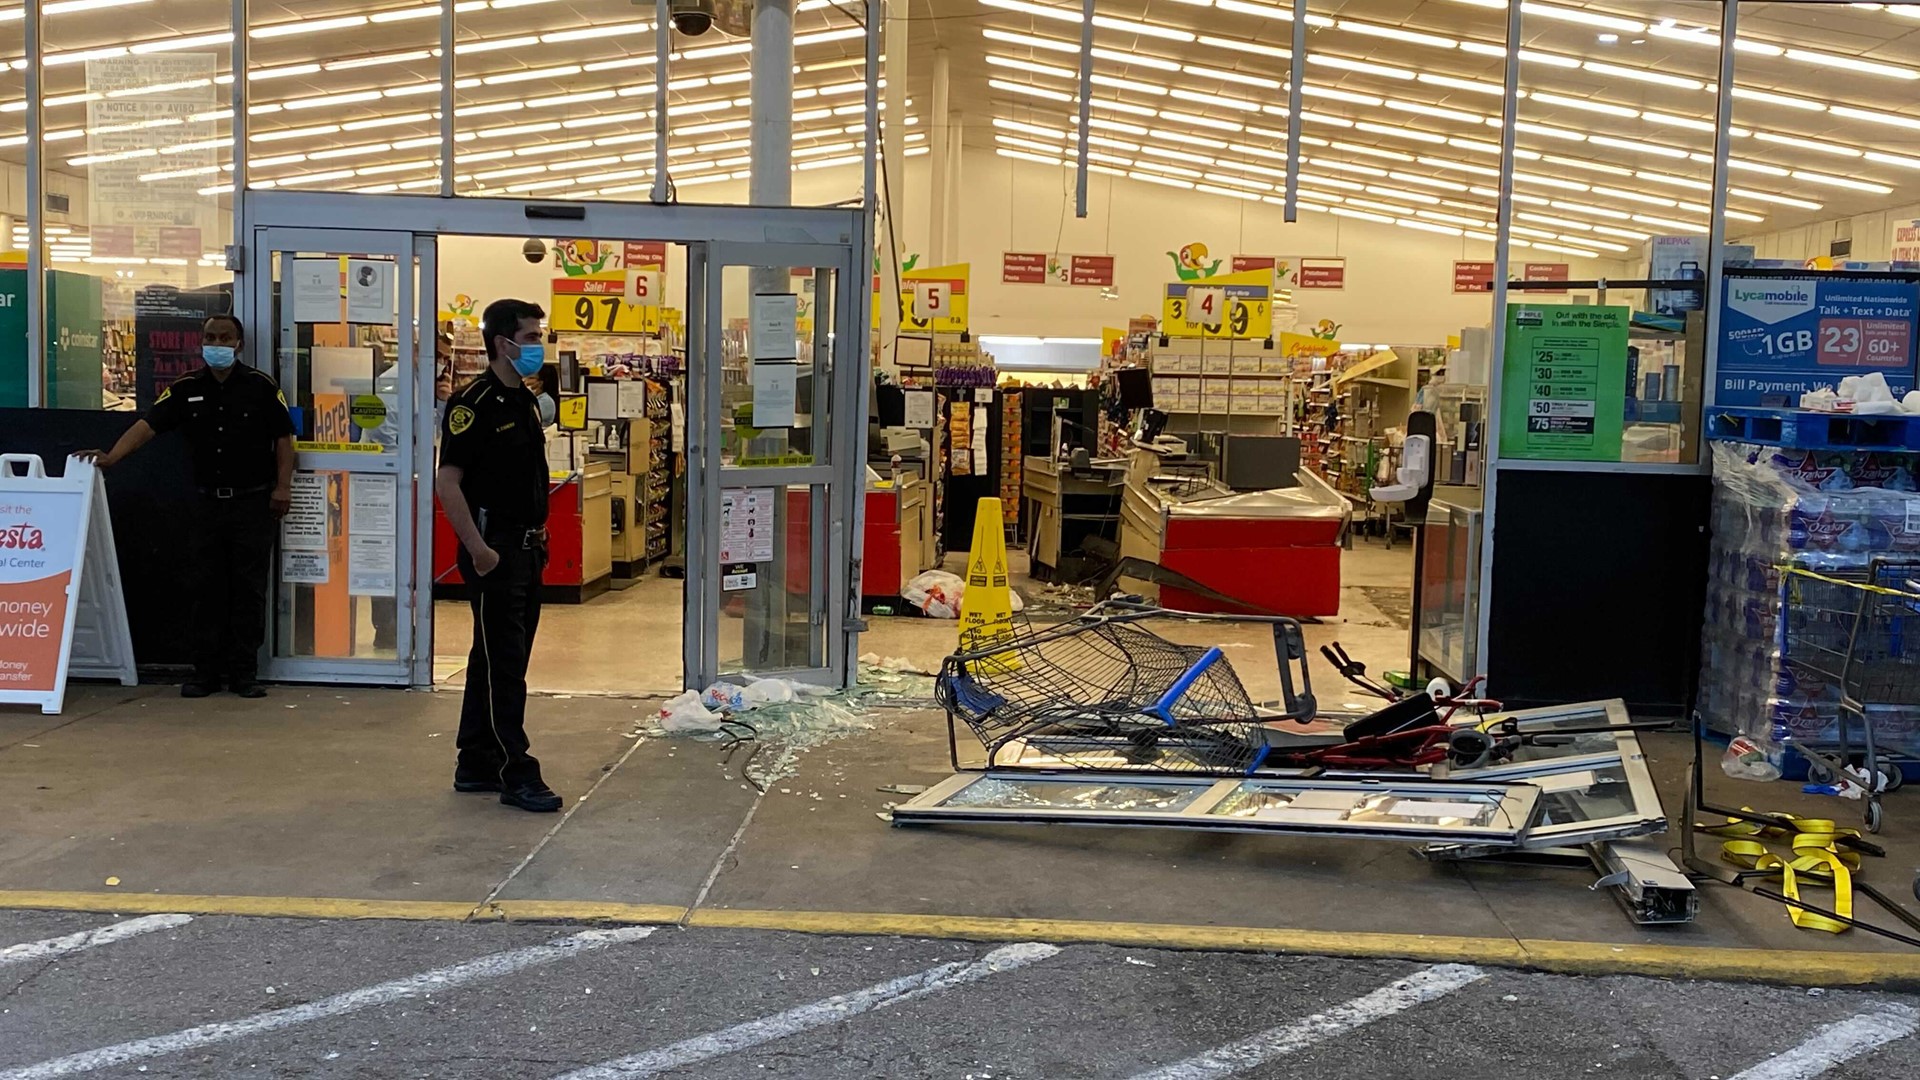 The driver was arrested after crashing into the southeast Houston grocery store.